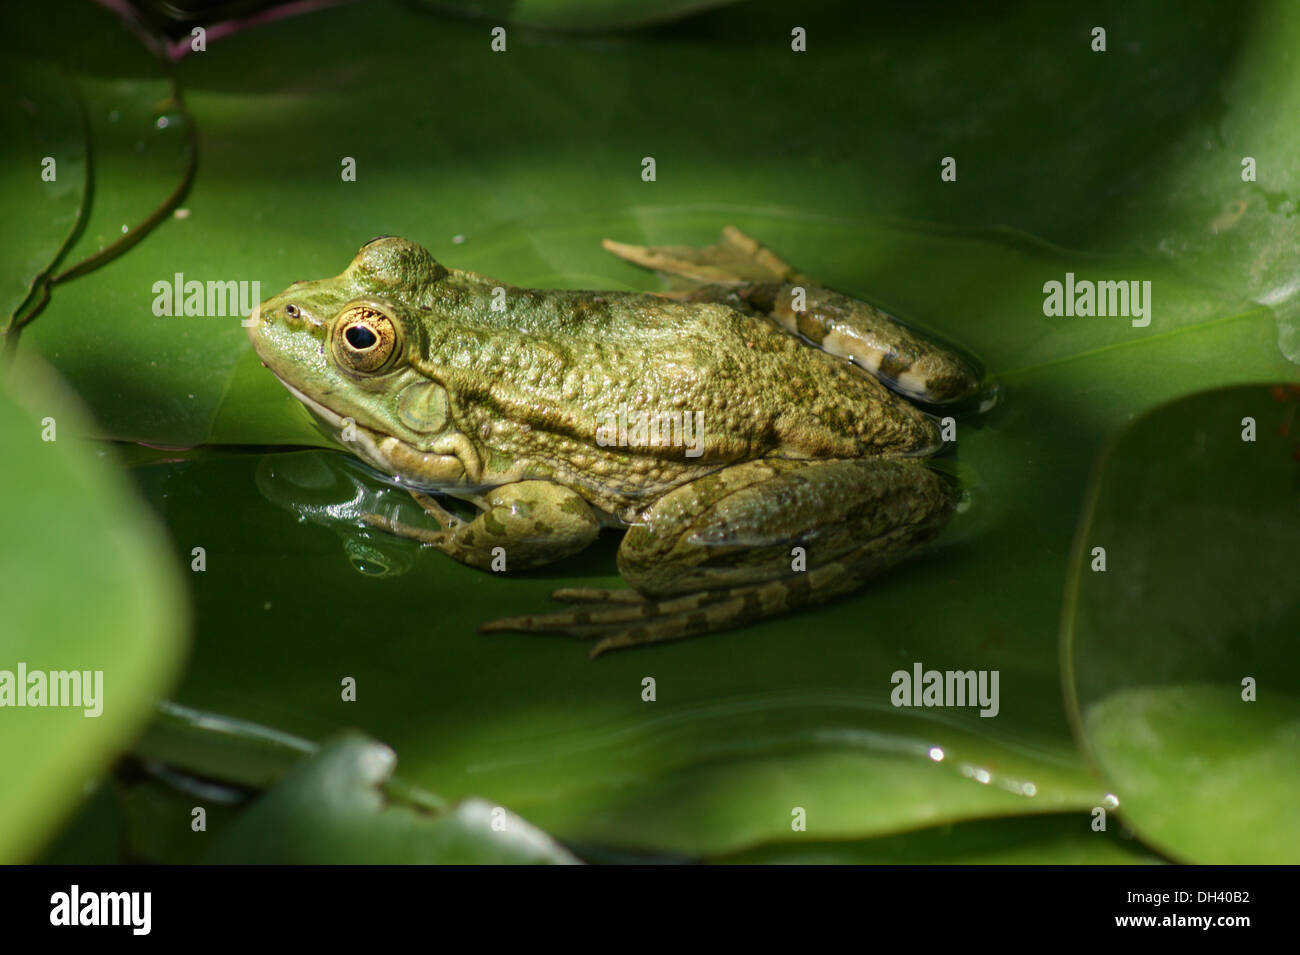 Close-up of green frog on lily pad Stock Photo